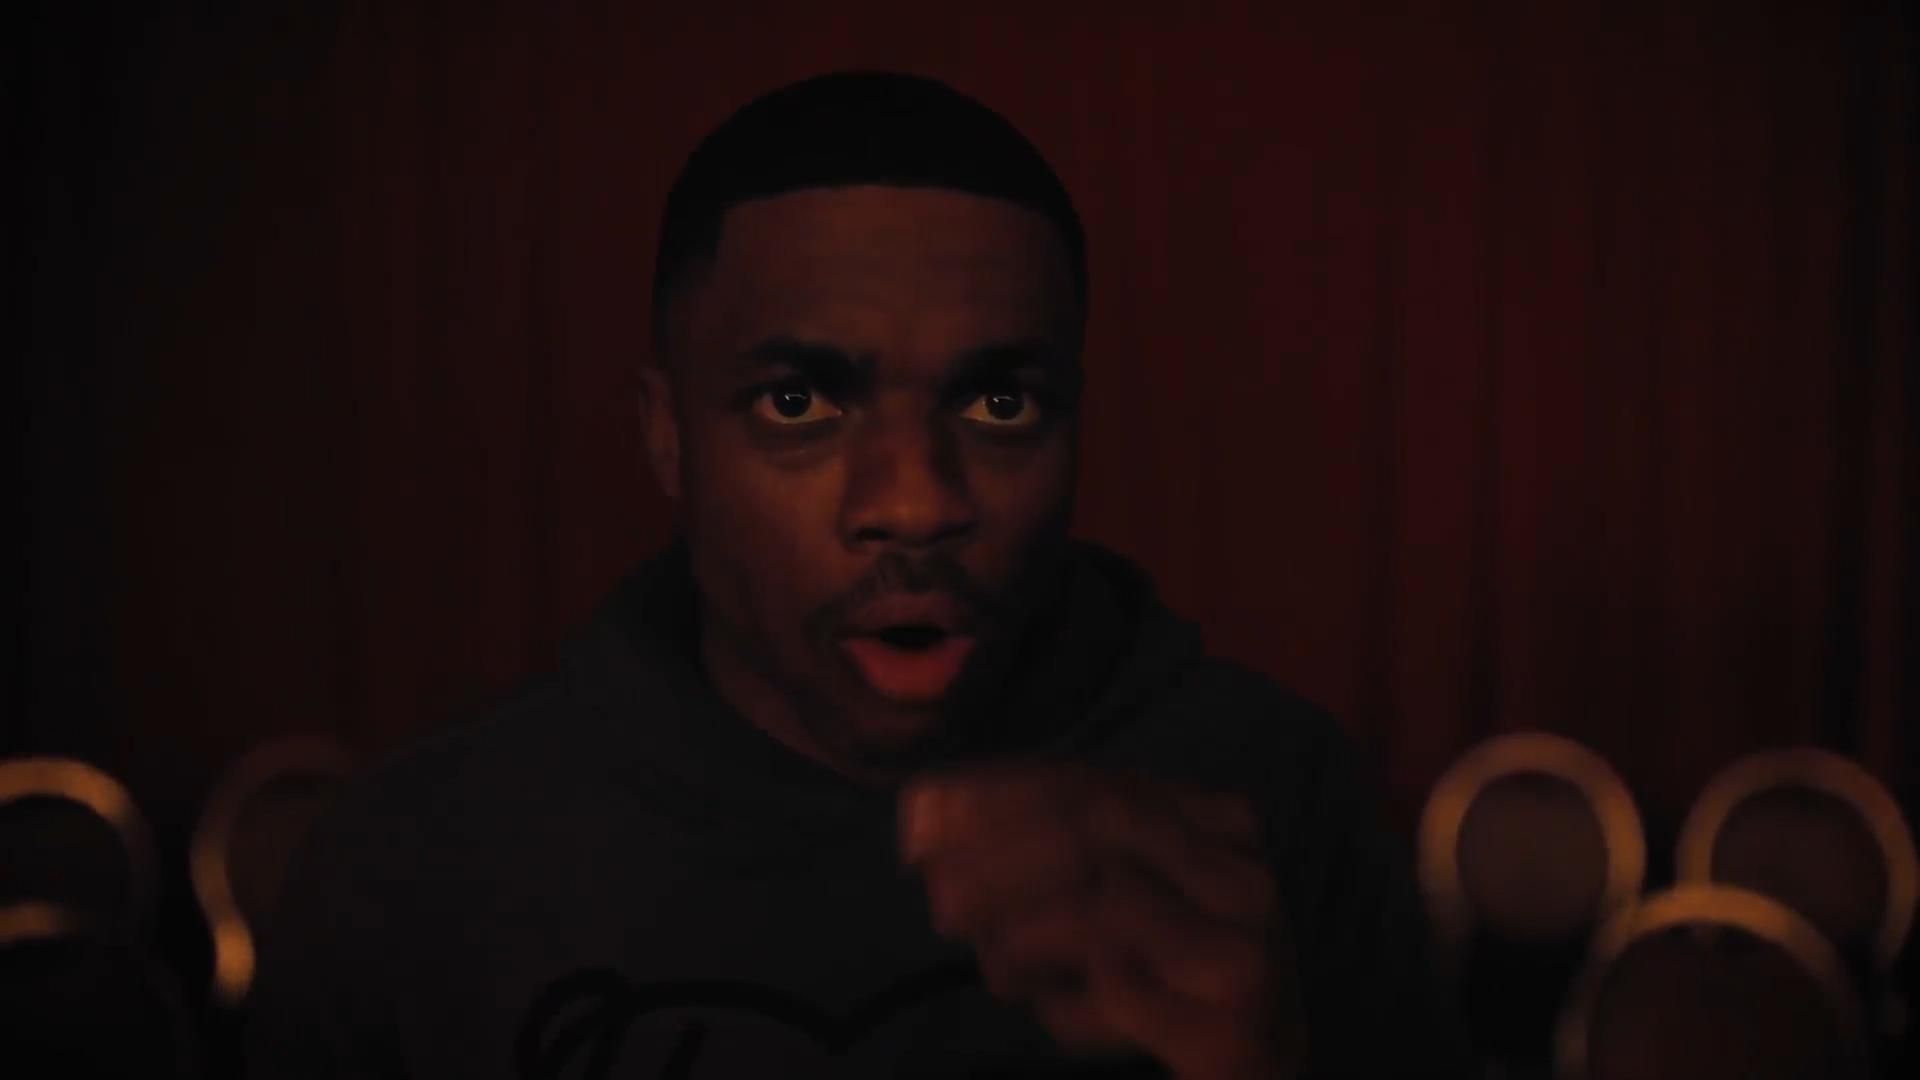 The Vince Staples Show background